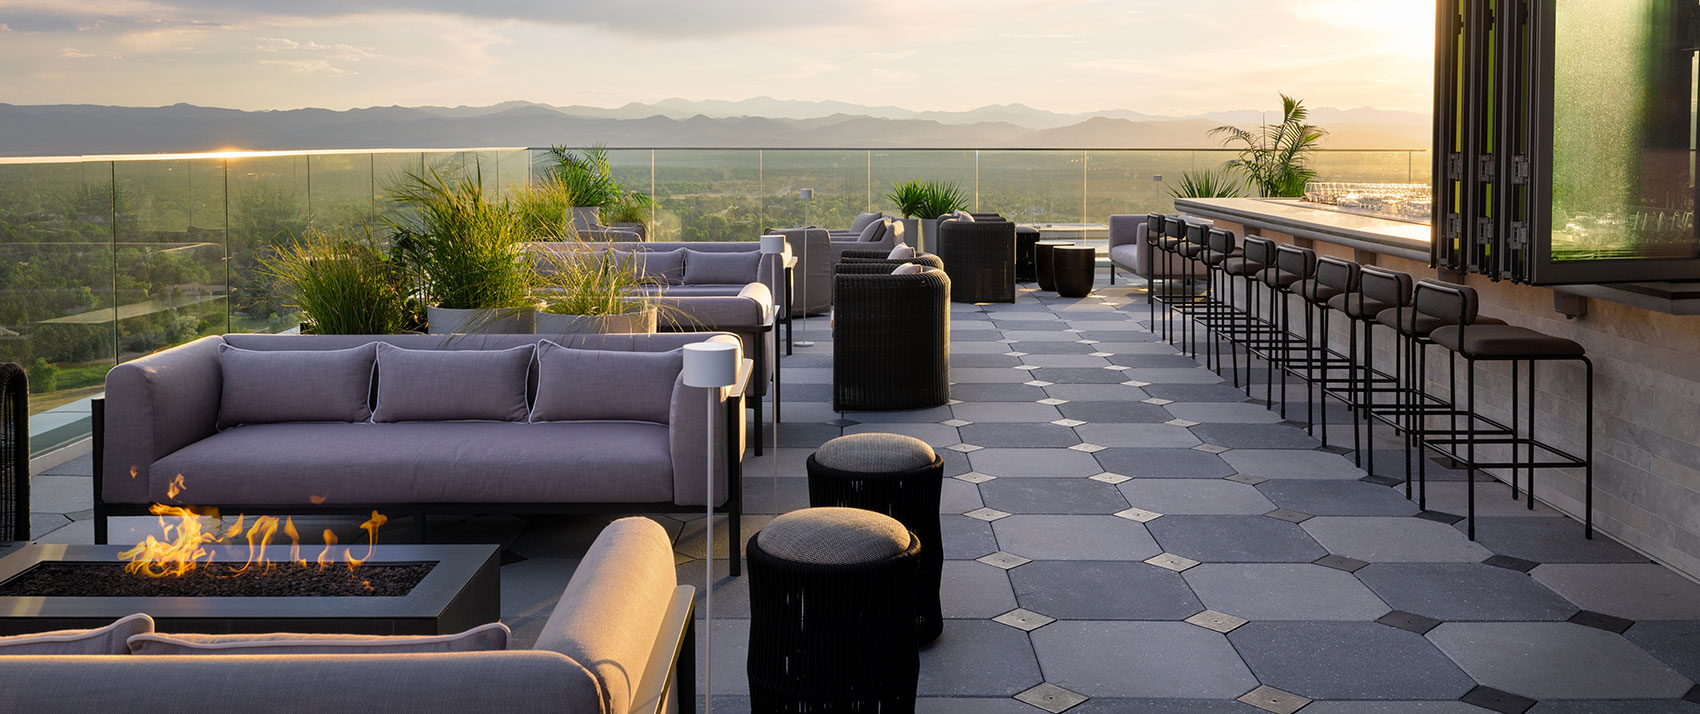 Halo Bar Outdoor Rooftop Seating Area